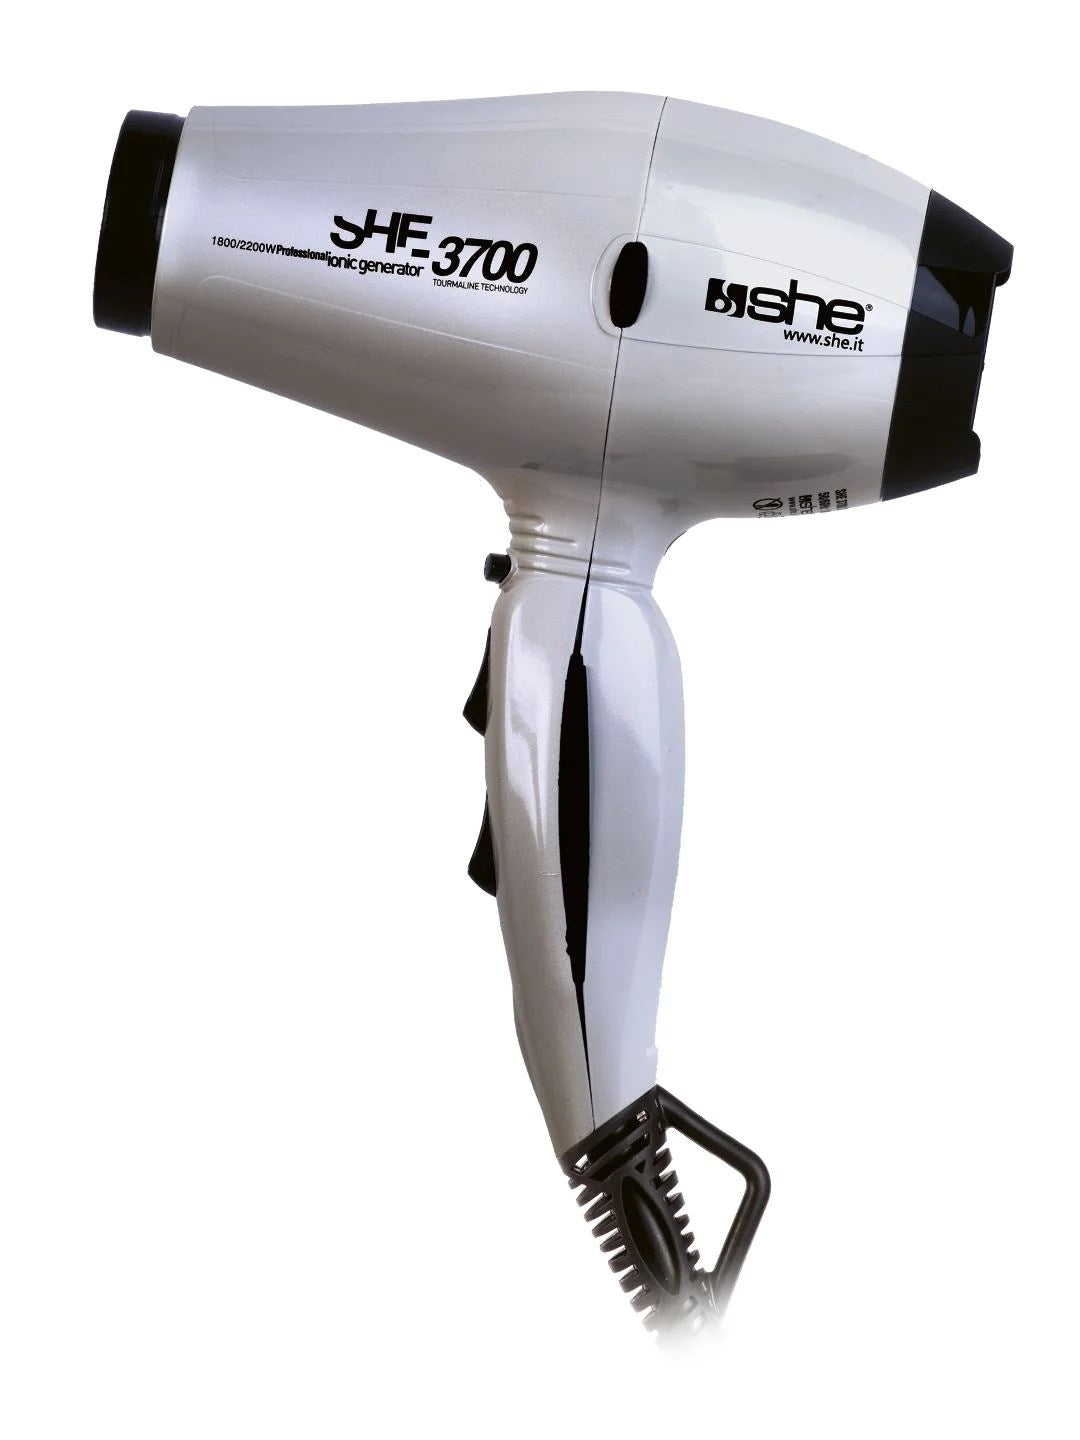 

She is a professional Compact Hair Dryer 3700 Ionic 2200 W Silver Color.